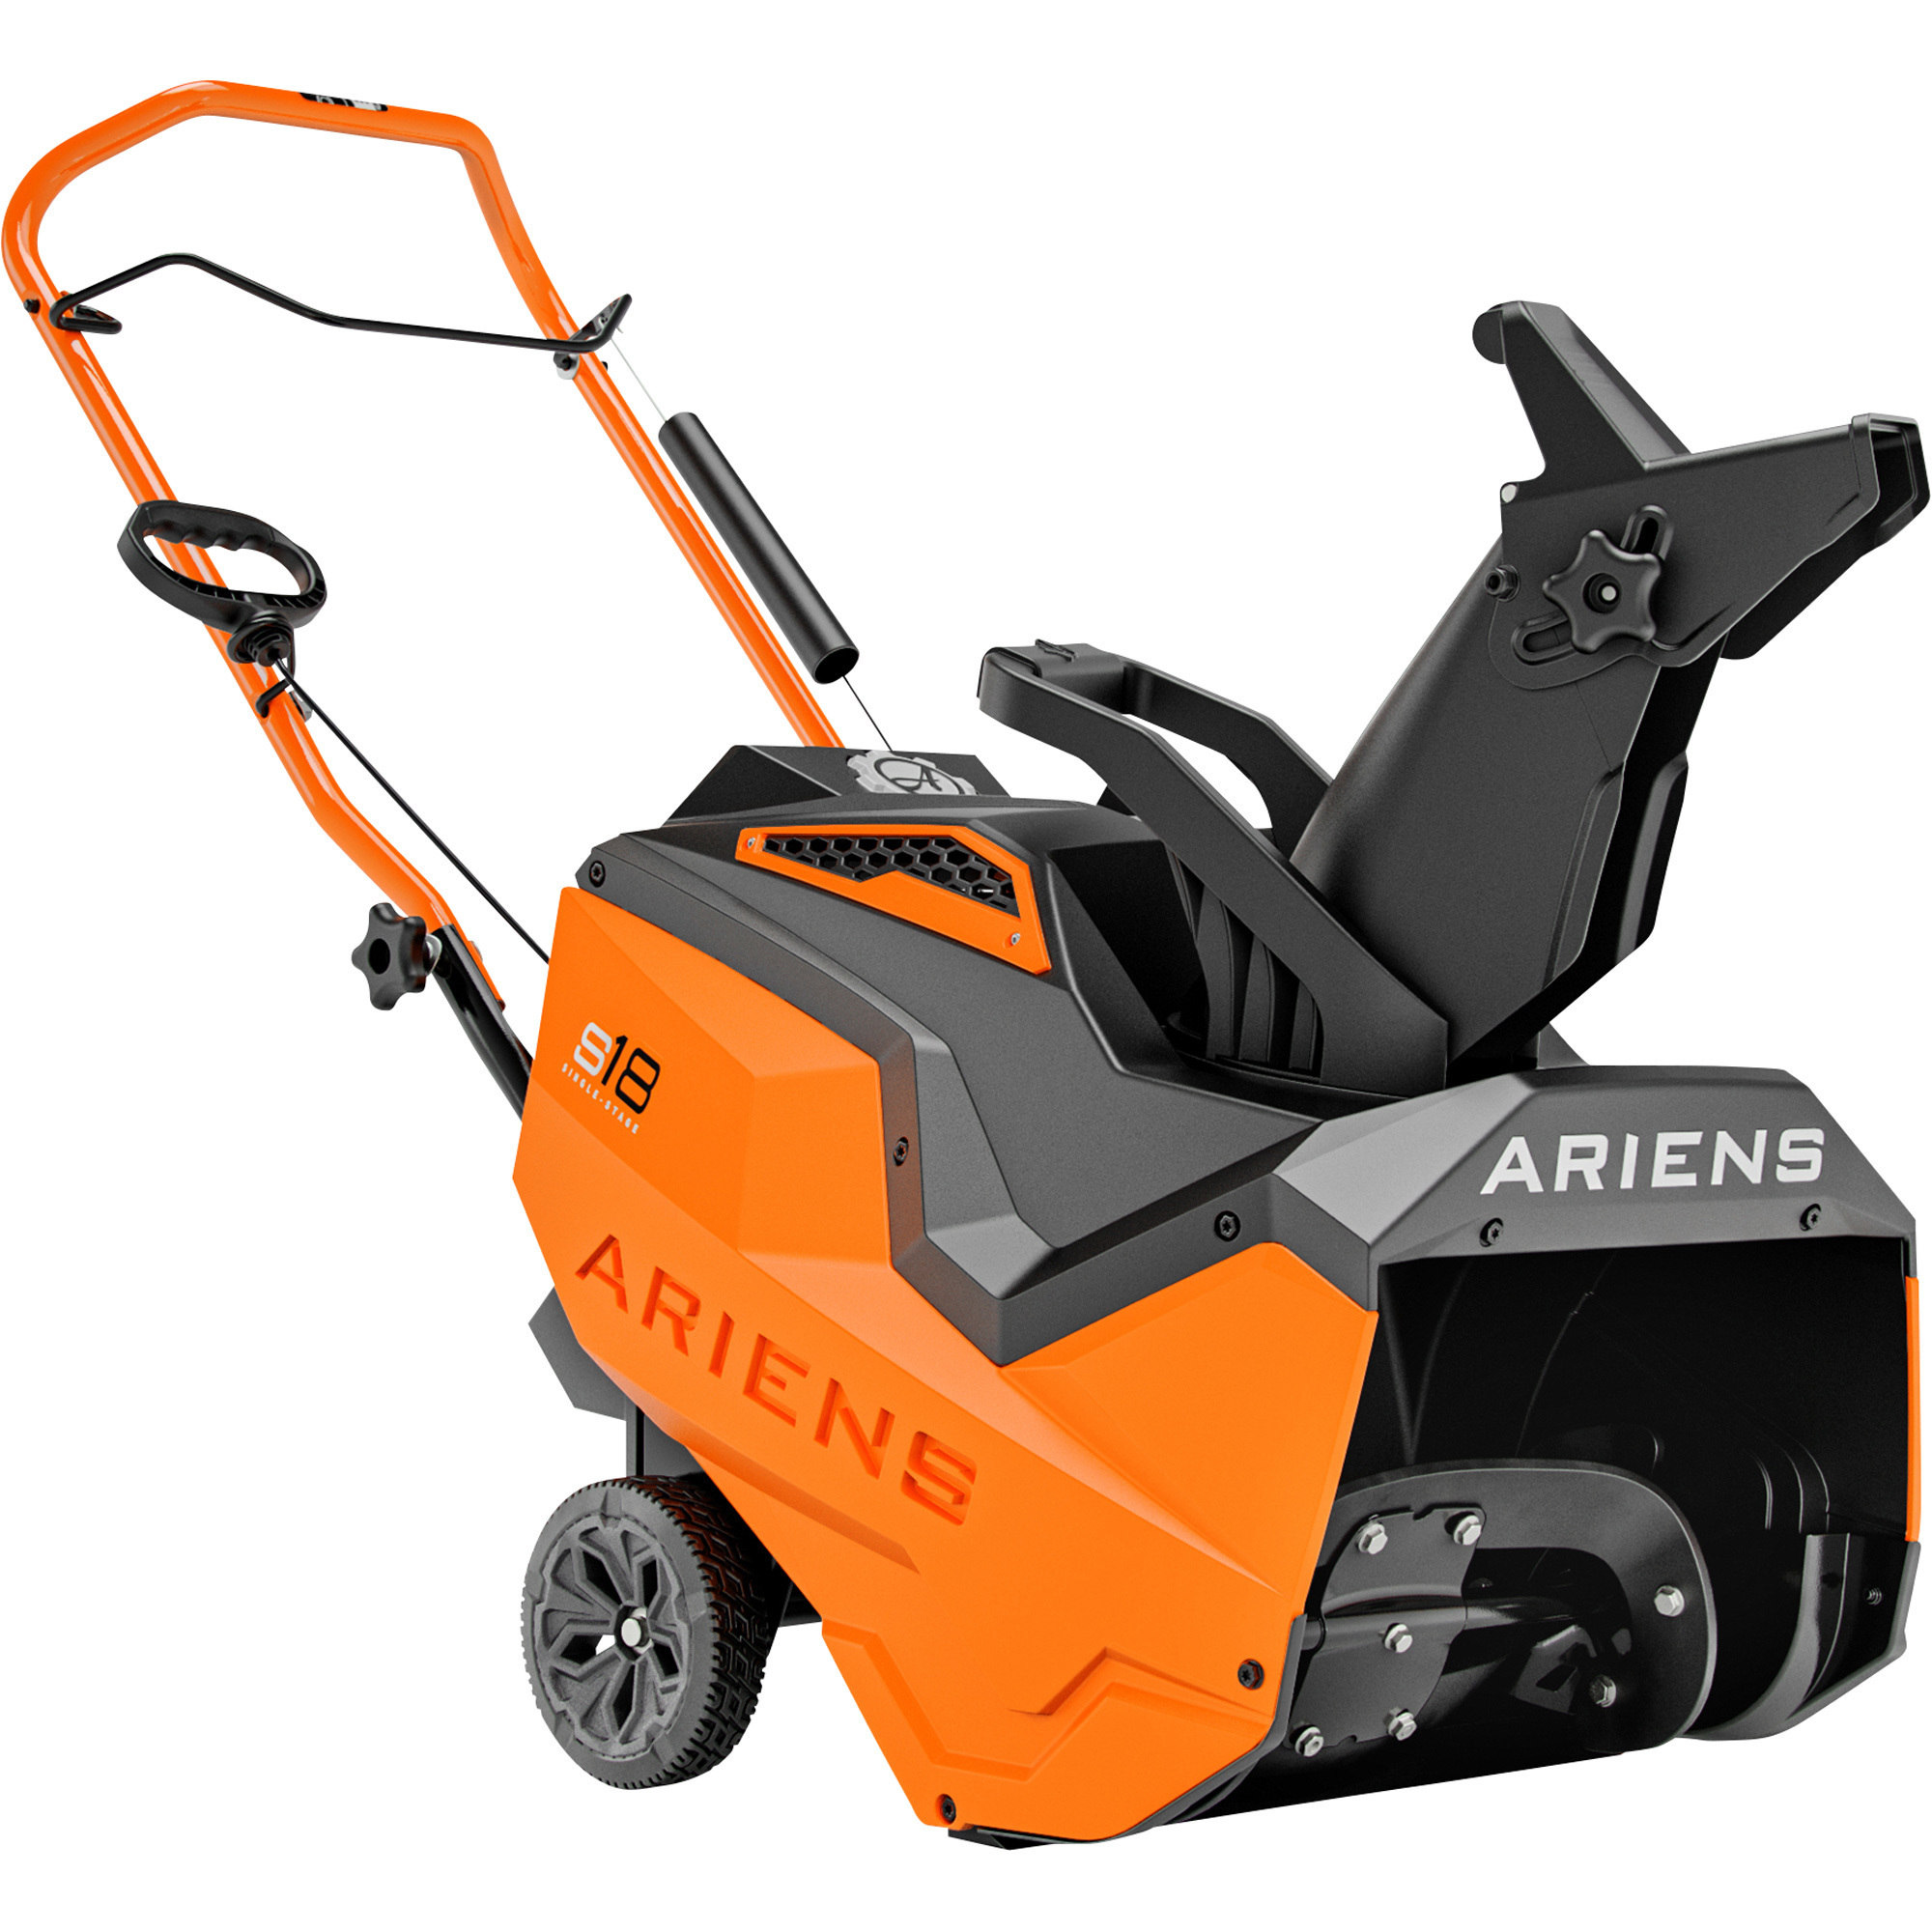 Ariens S18 Single-Stage Snow Blower with Electric Start, 18Inch, 99cc, Model 938027